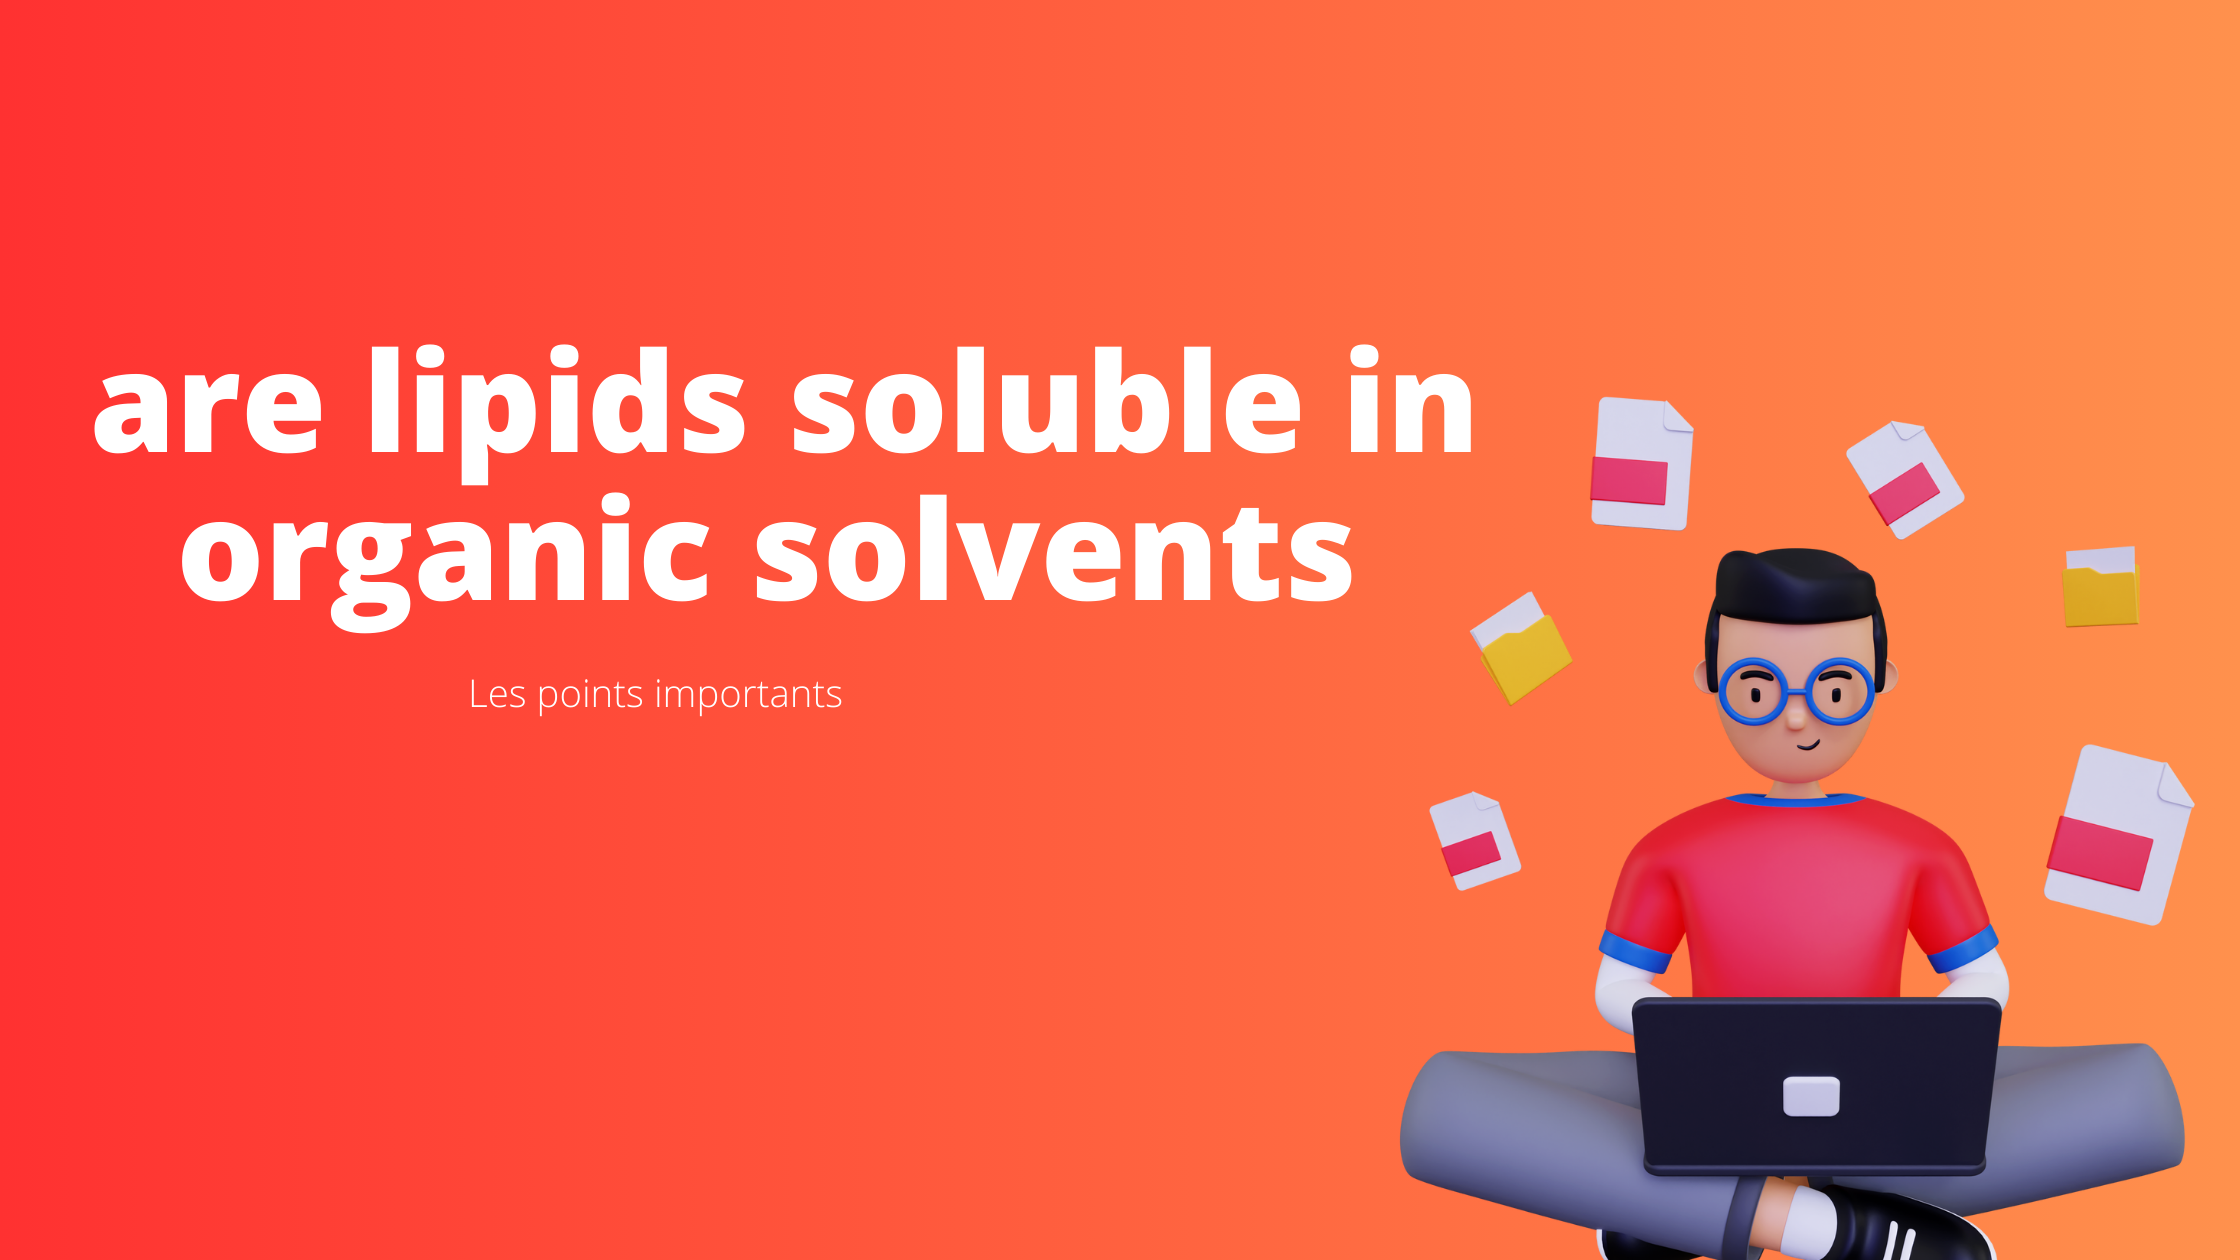 are lipids soluble in organic solvents | Les points importants